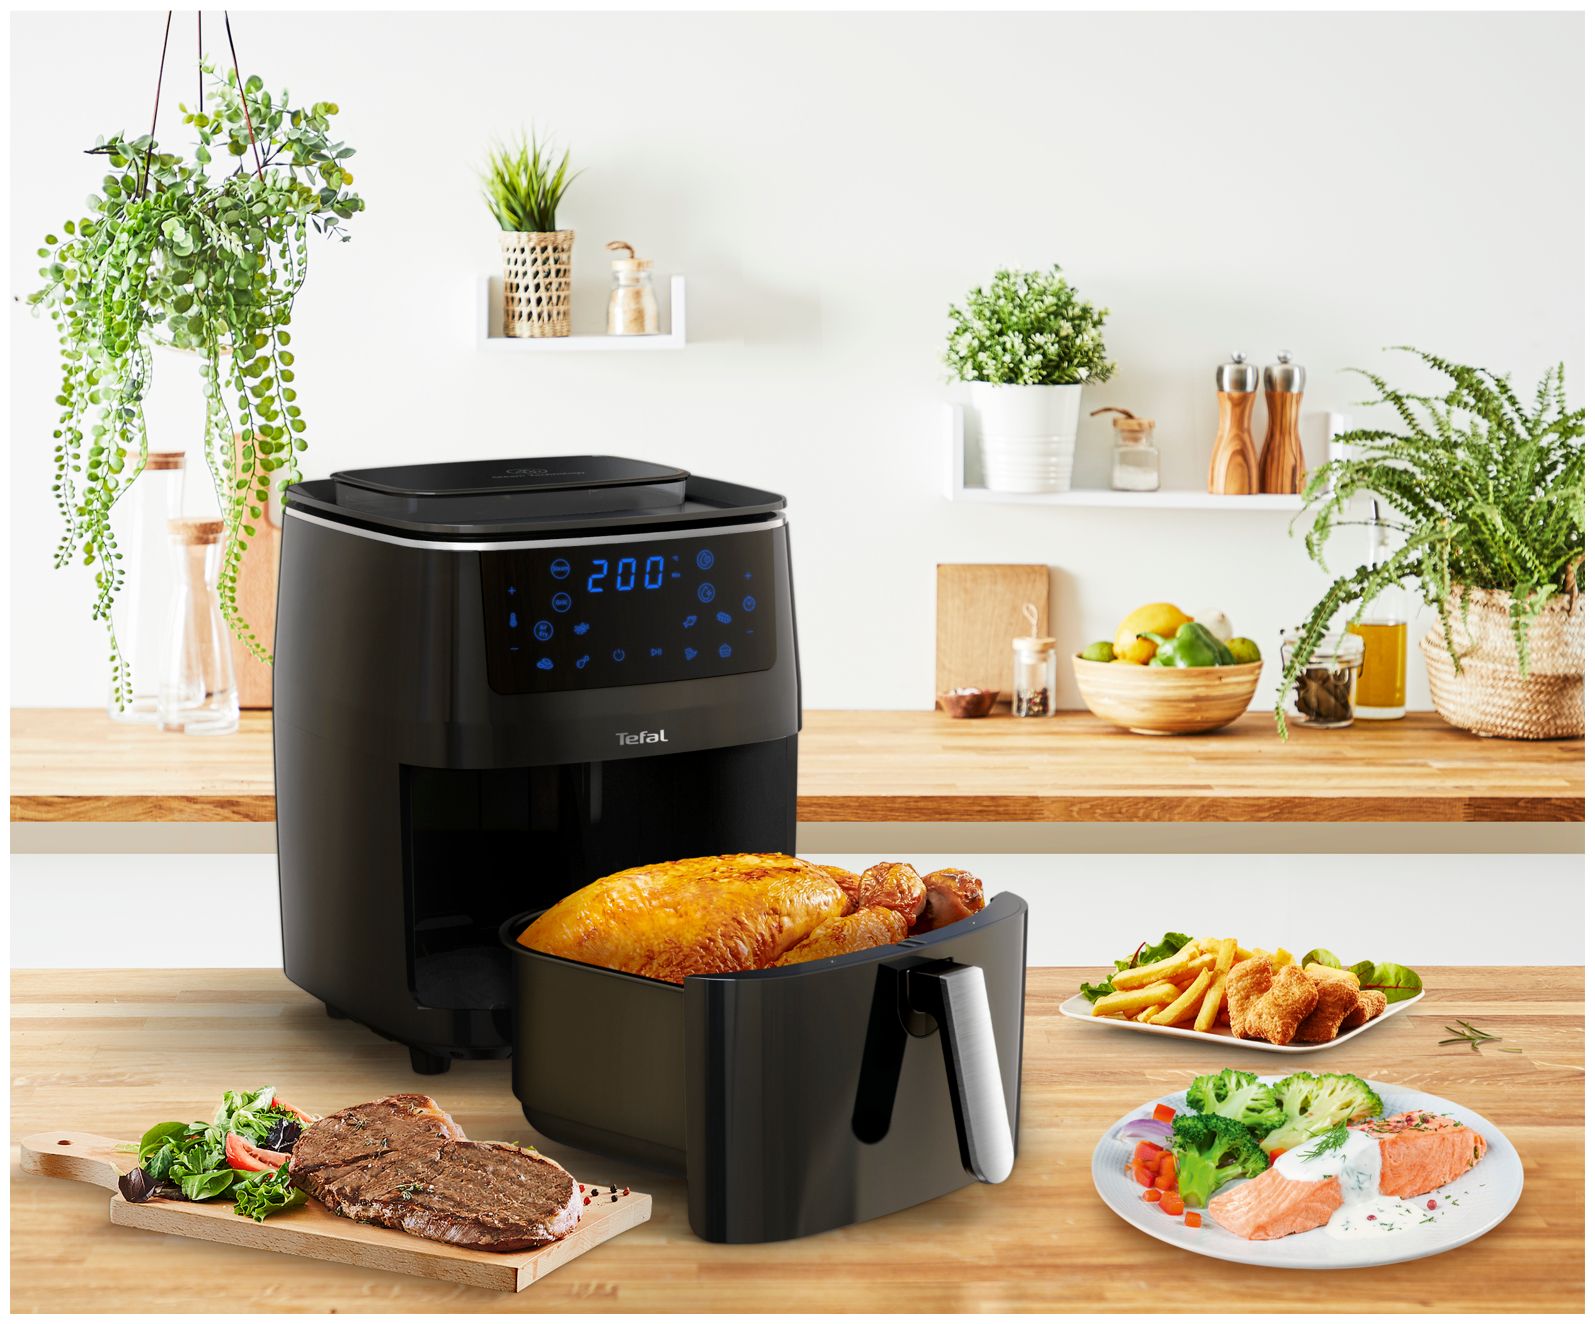 Boomstore W Easy Heißluftfritteuse & Grill FW2018 1700 Steam Tefal bei Fry